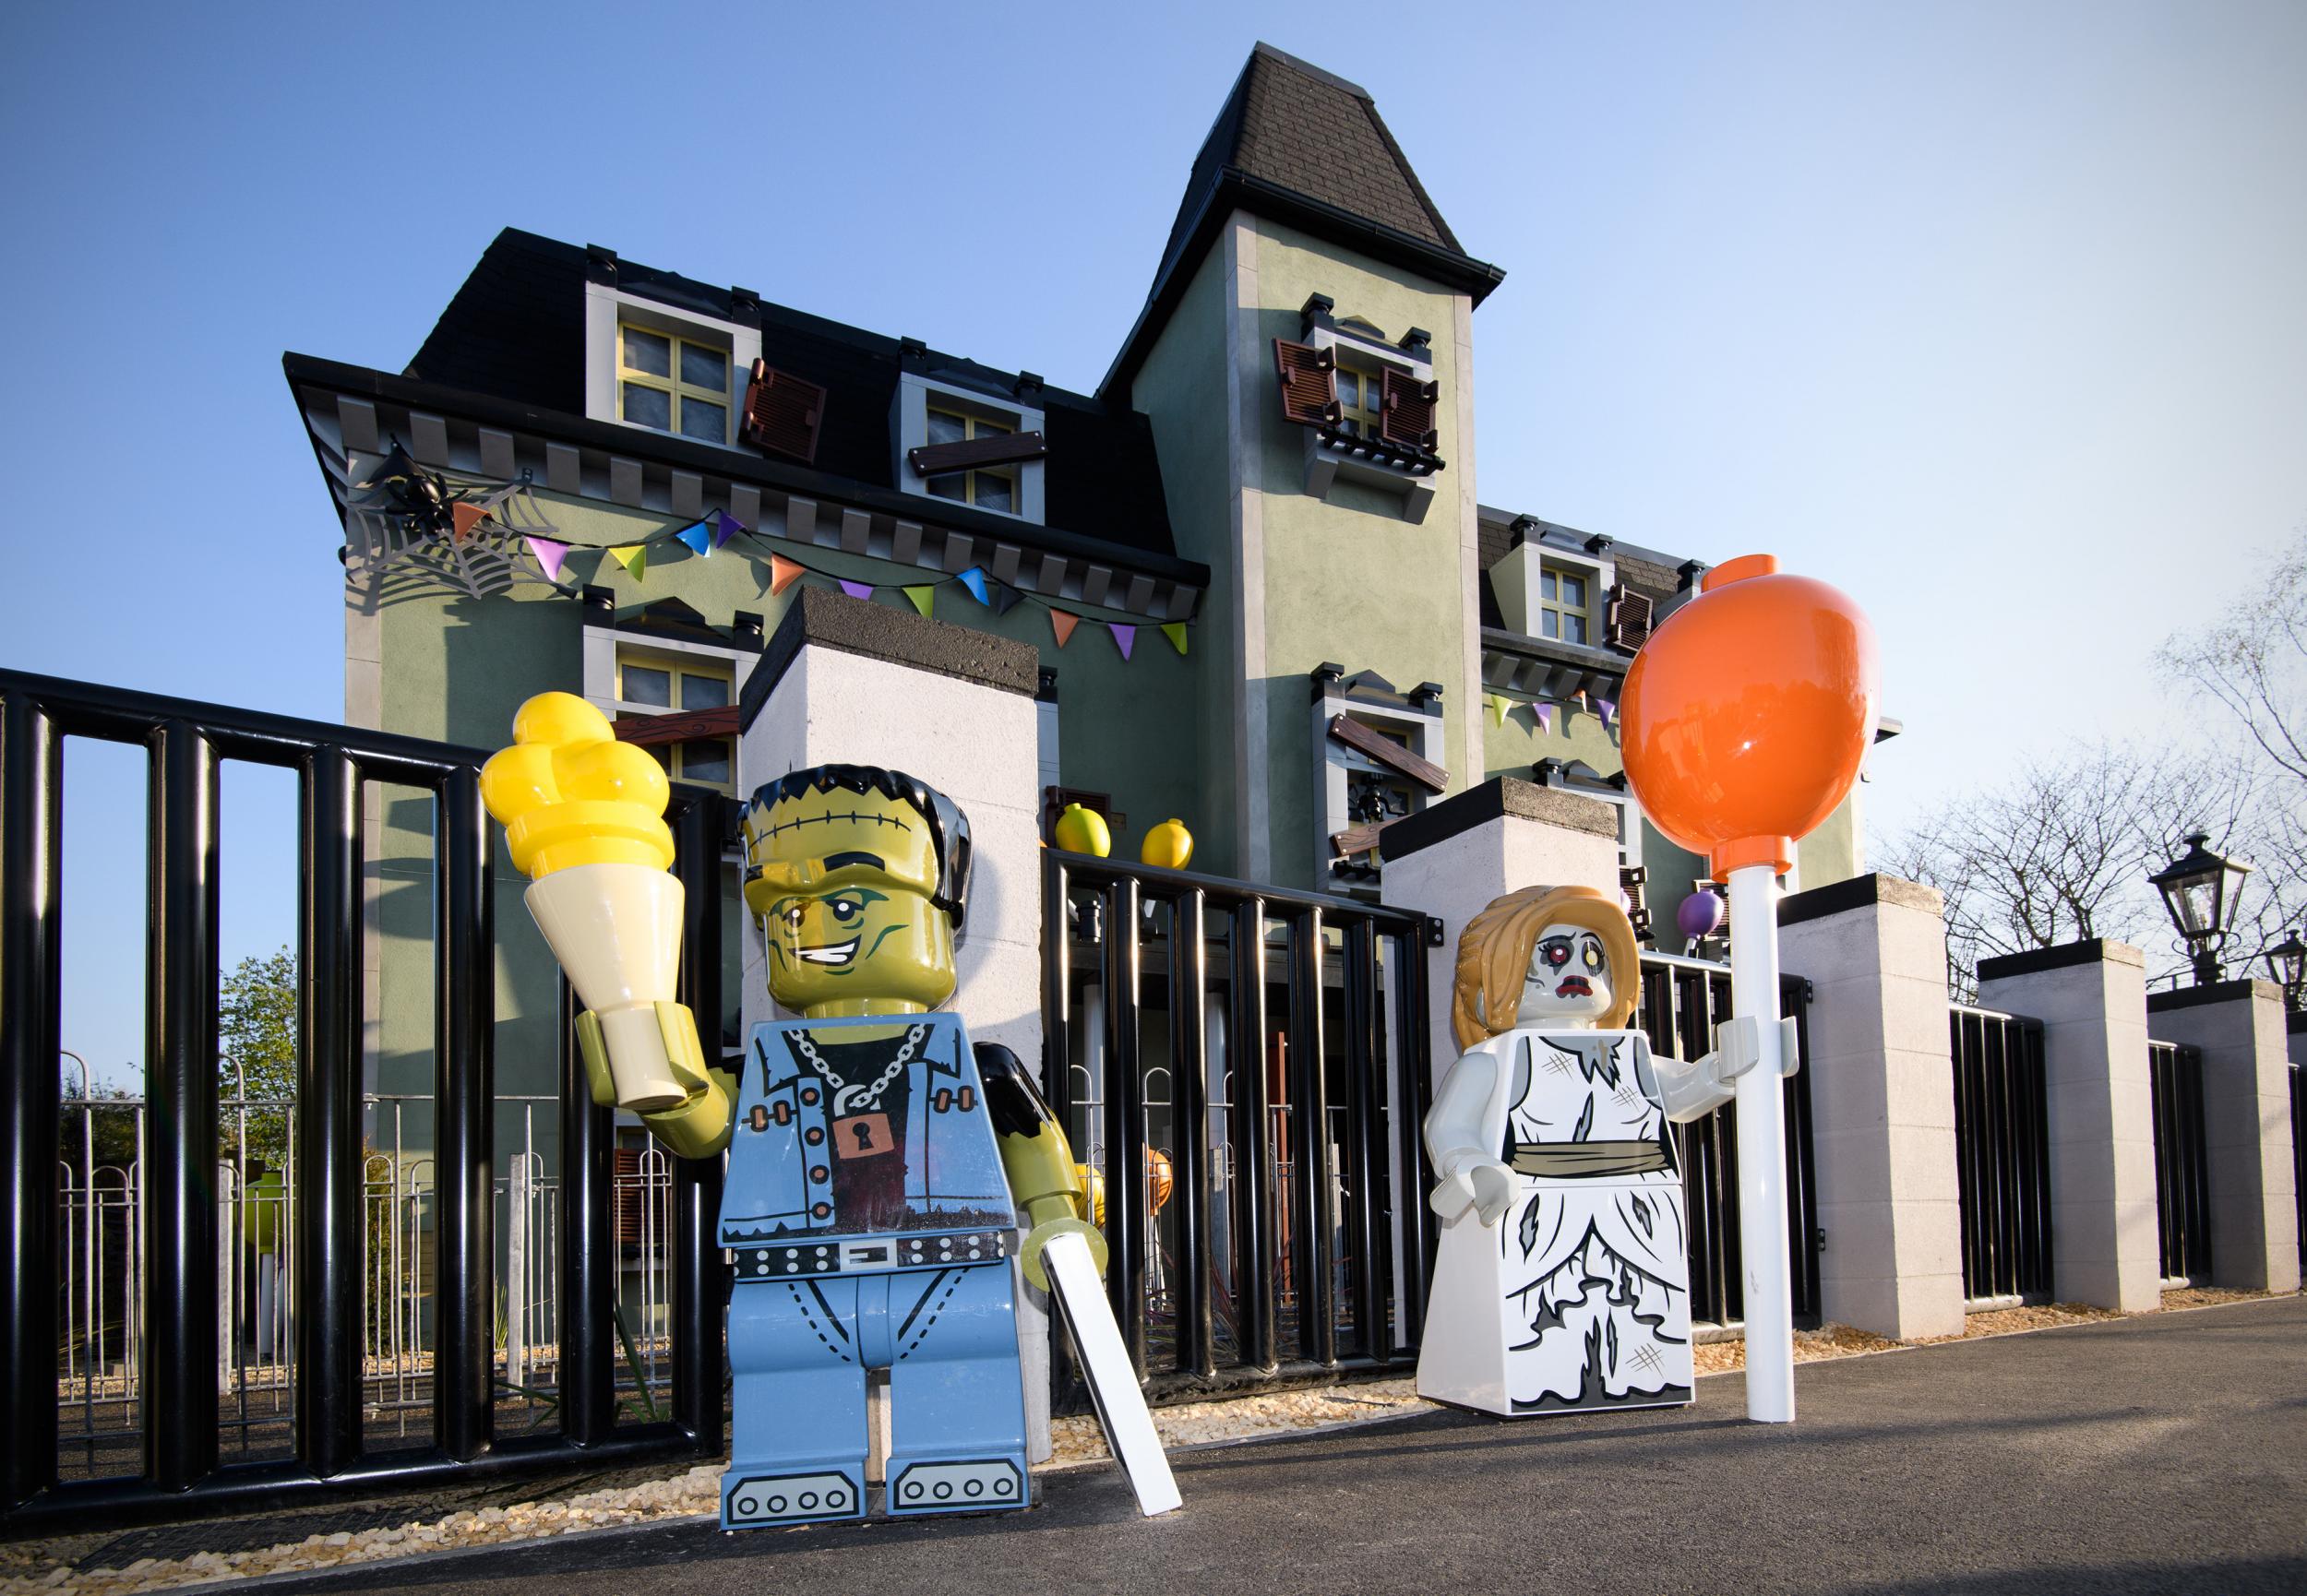 Legoland has a new Haunted House Monster Party ride